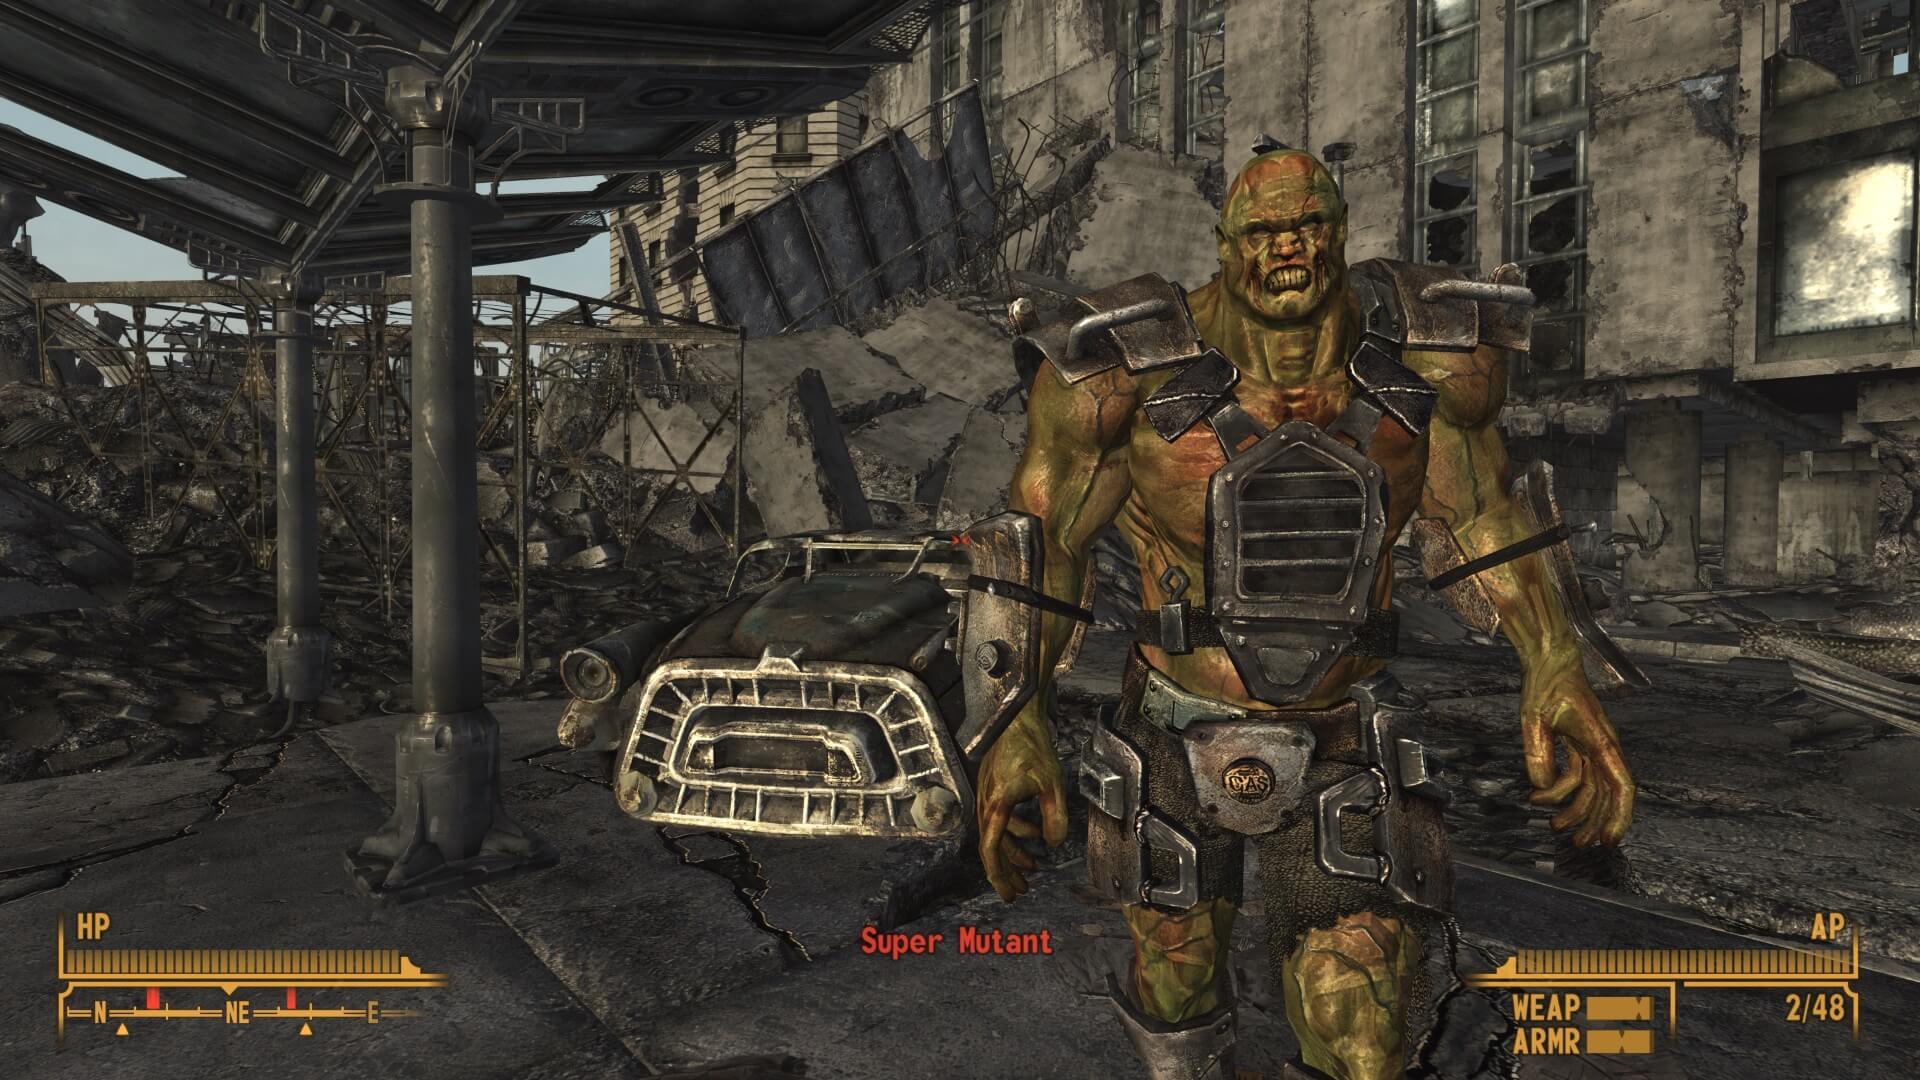 Hd texture pack for fallout 4 фото 57